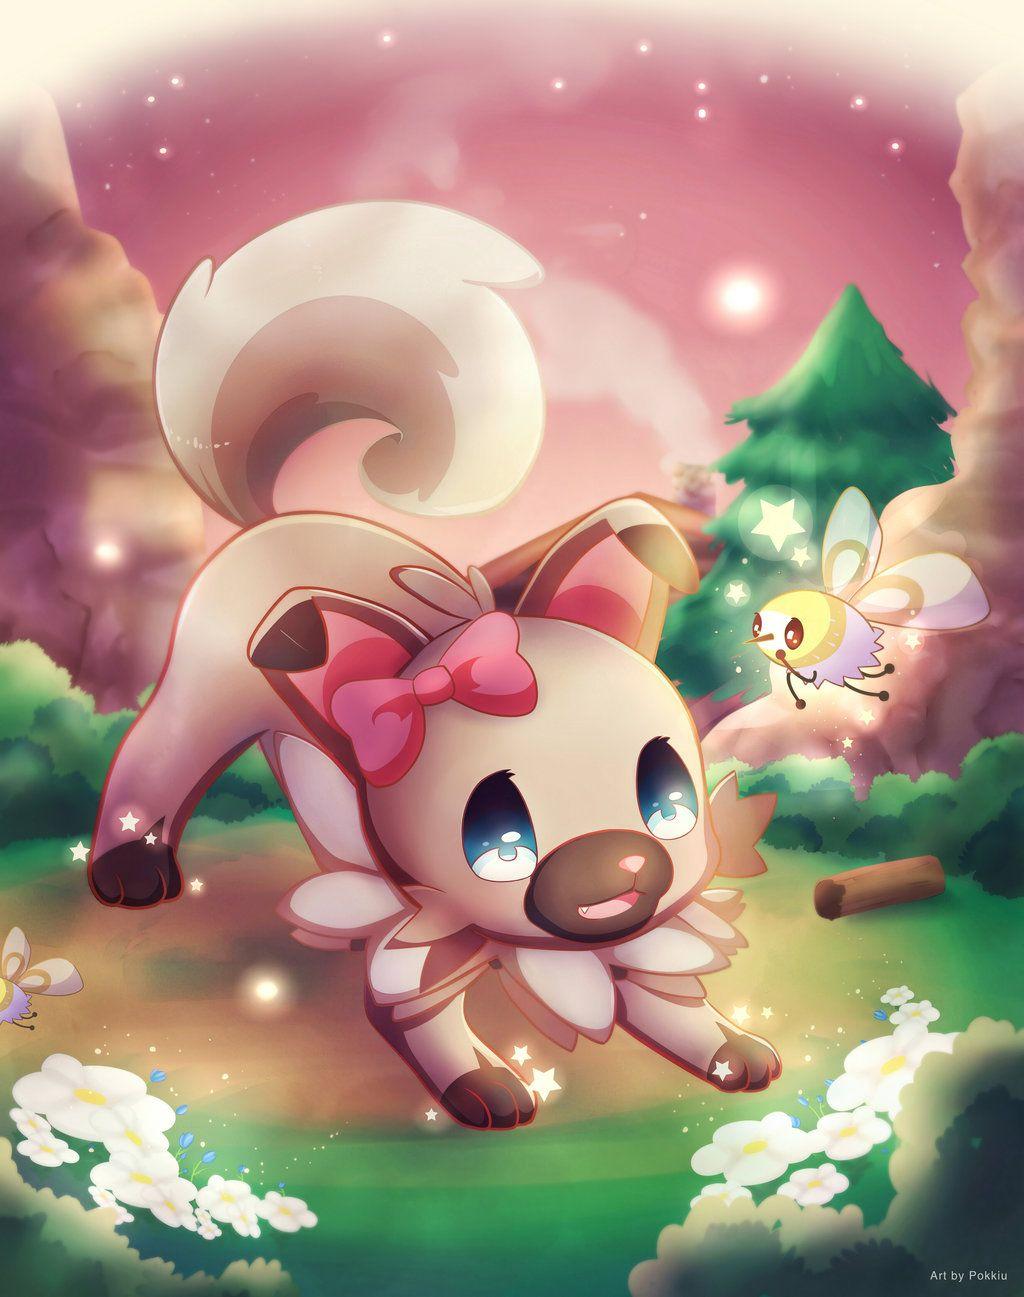 Clefairy Wallpaper, PC Clefairy Wallpaper Most Beautiful Image